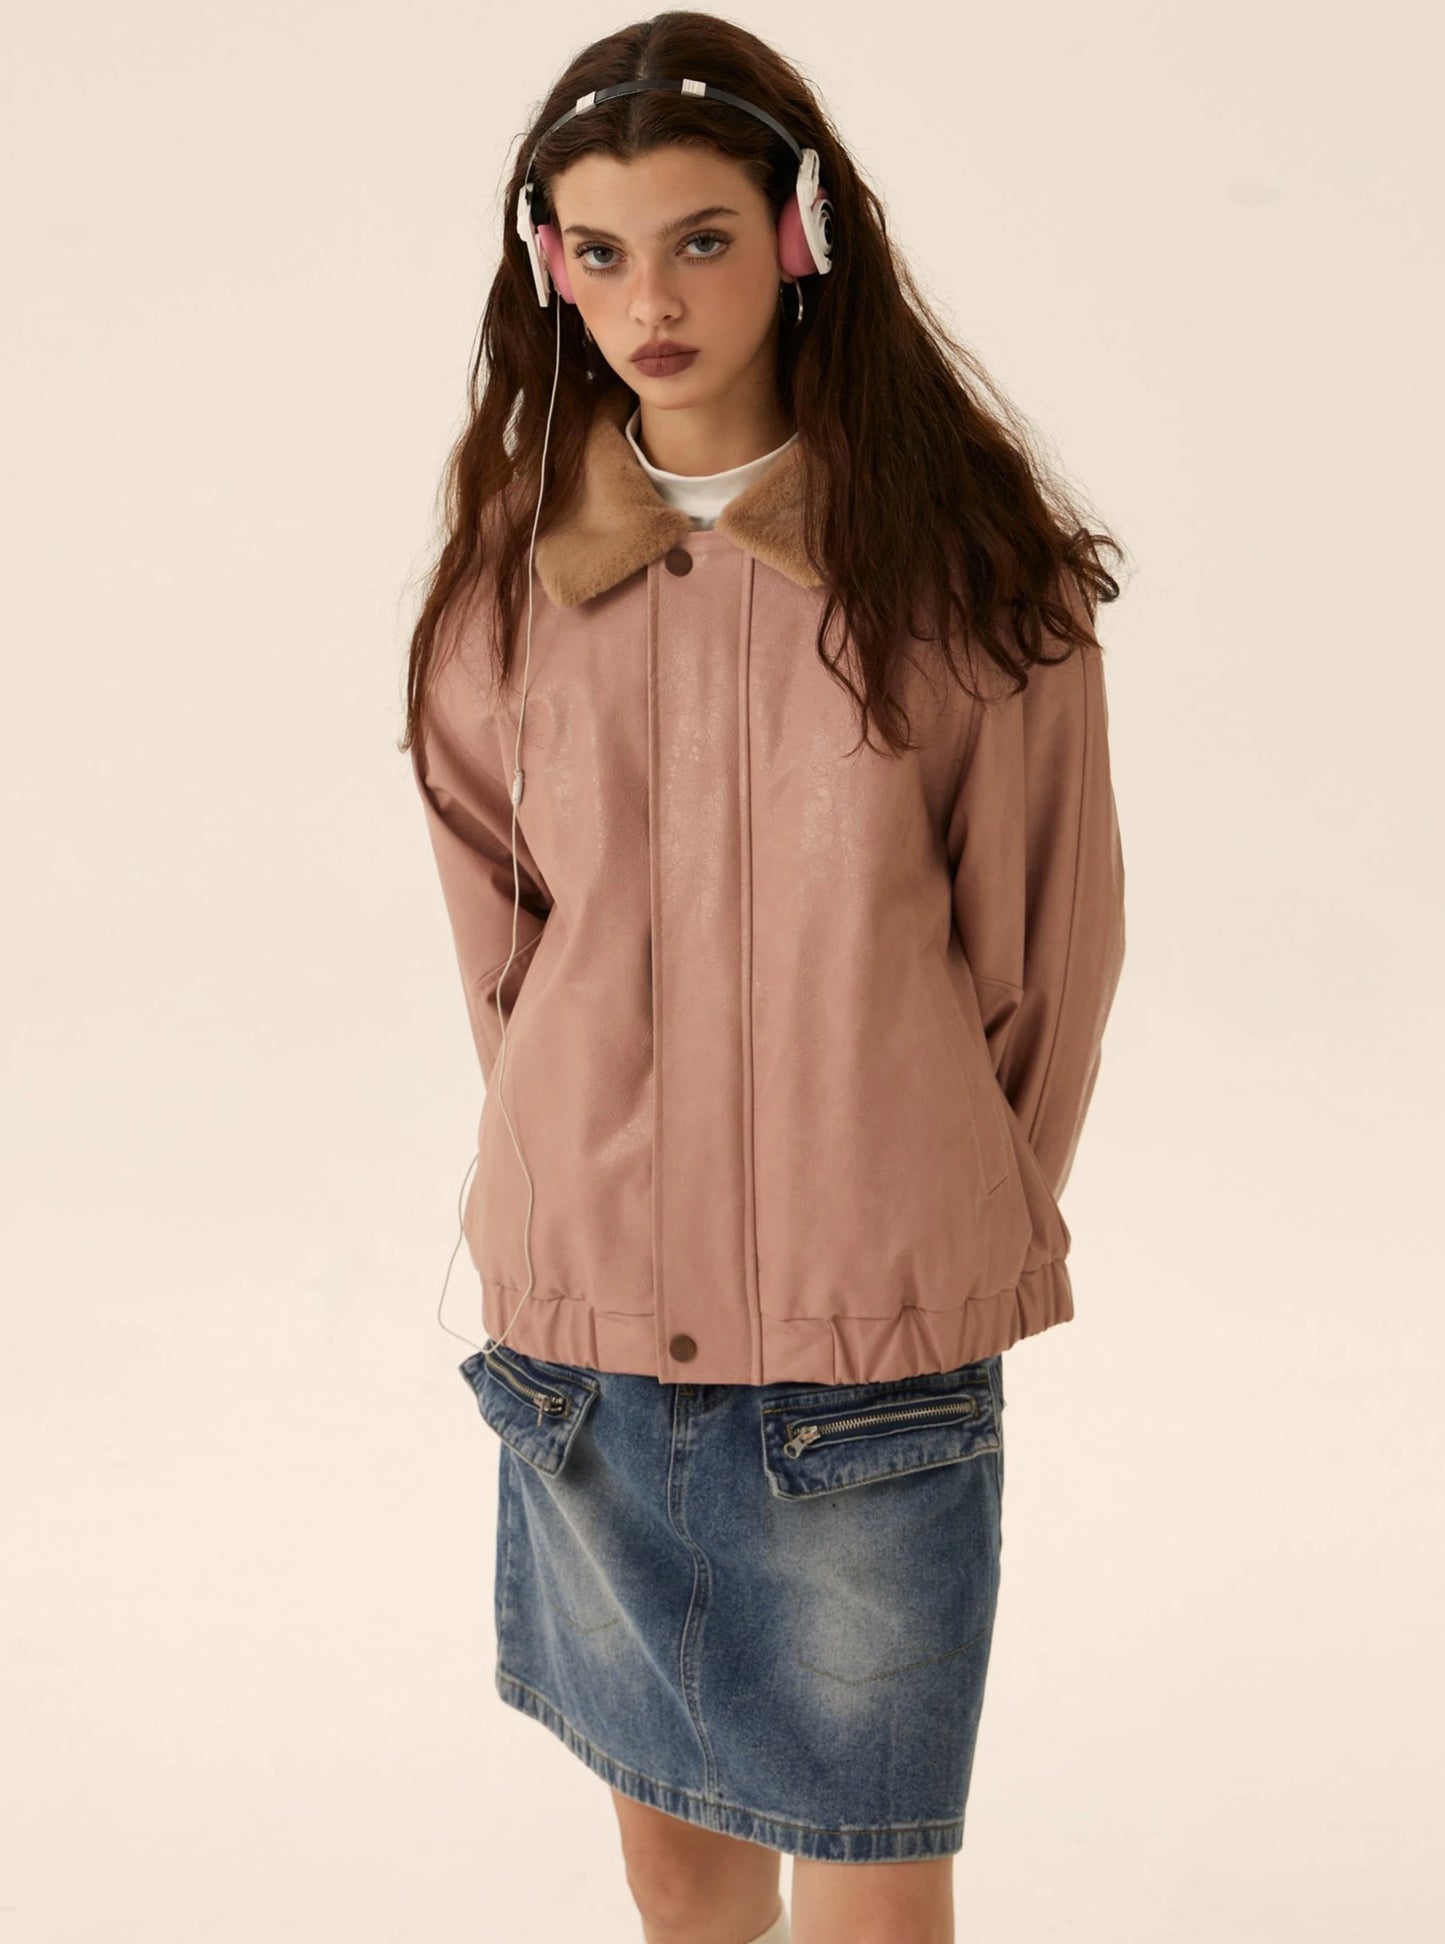 Long-sleeved Casual Cotton Jacket